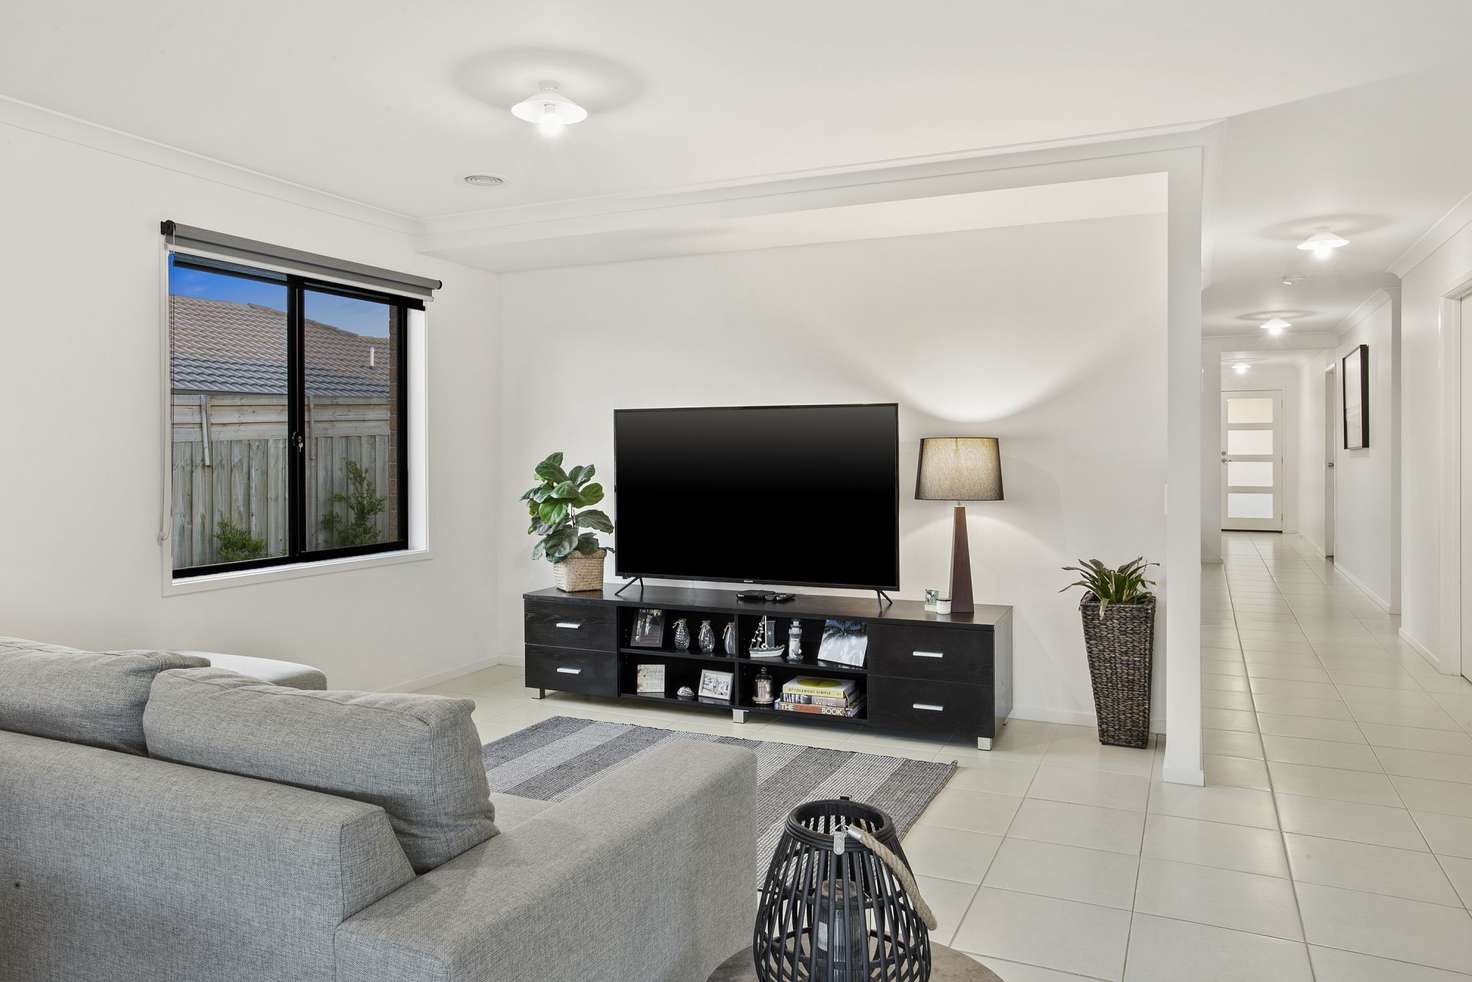 Main view of Homely house listing, 3 Heritage Mews, Drysdale VIC 3222